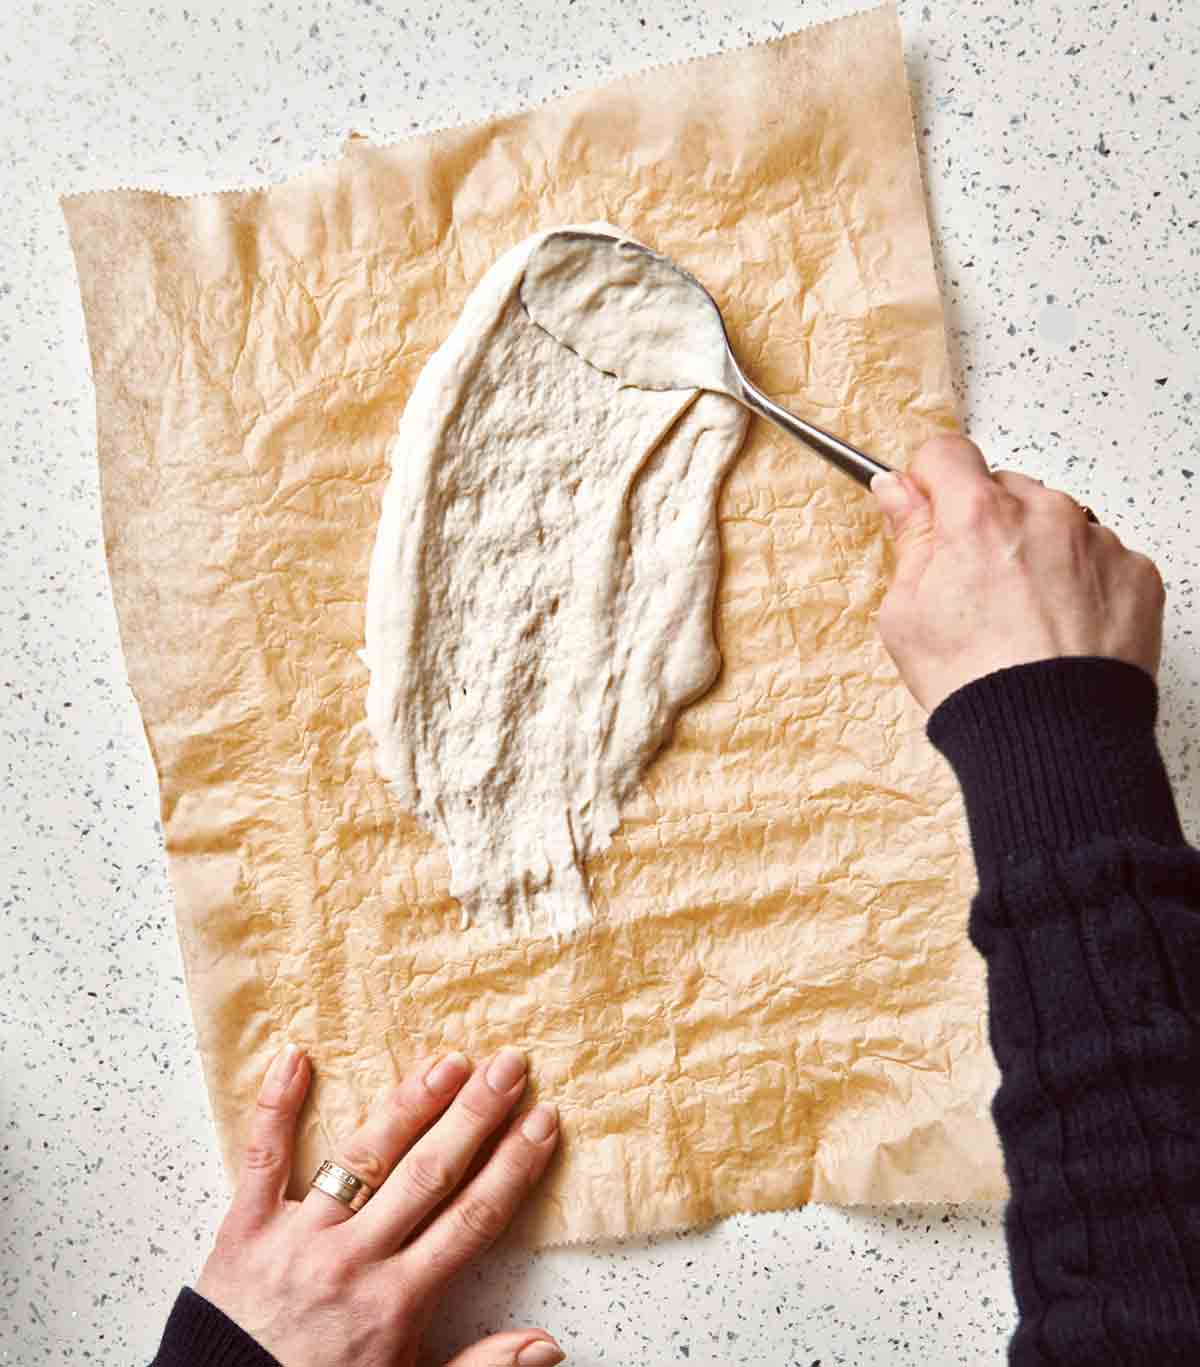 A person spreading sourdough starter on a sheet of parchment